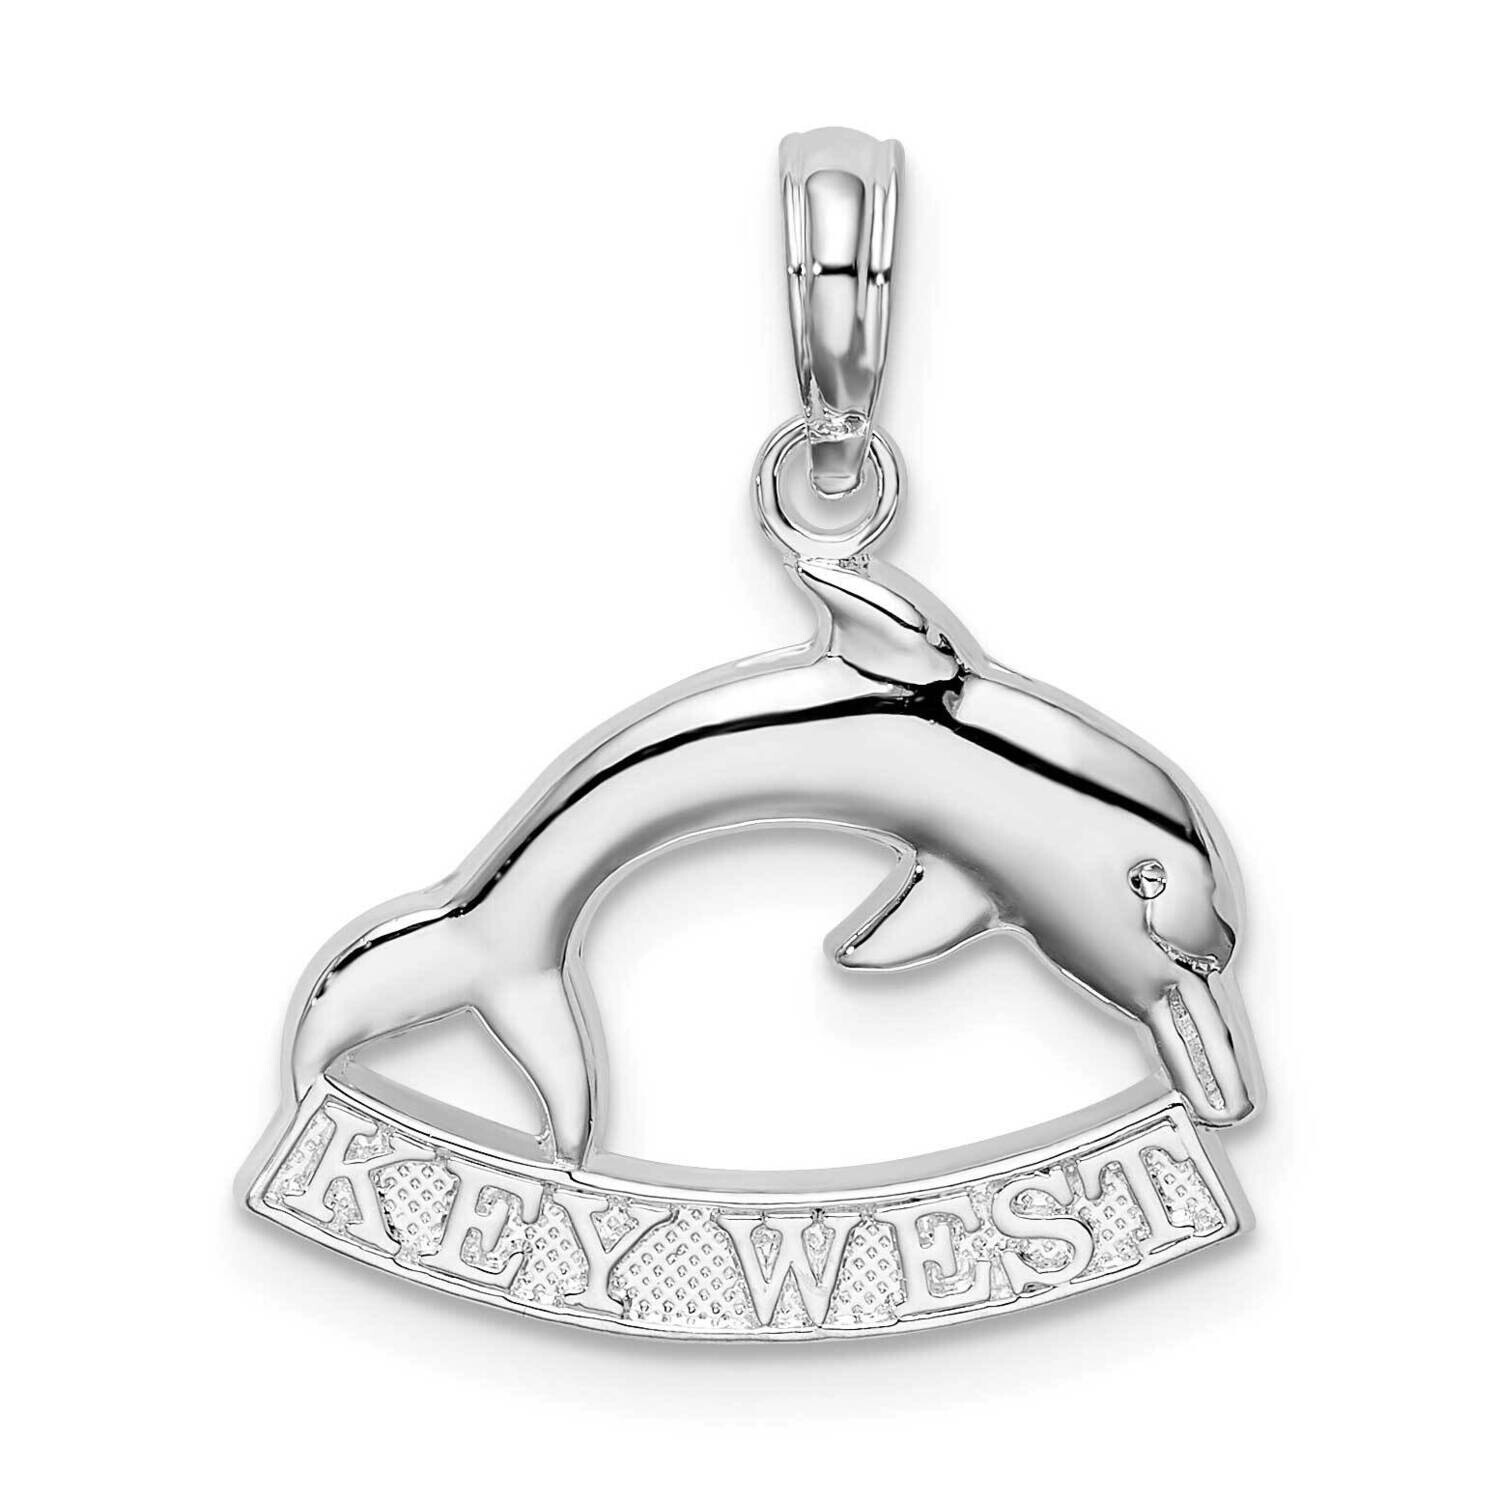 Key West Dolphin Pendant Sterling Silver Polished QC9926